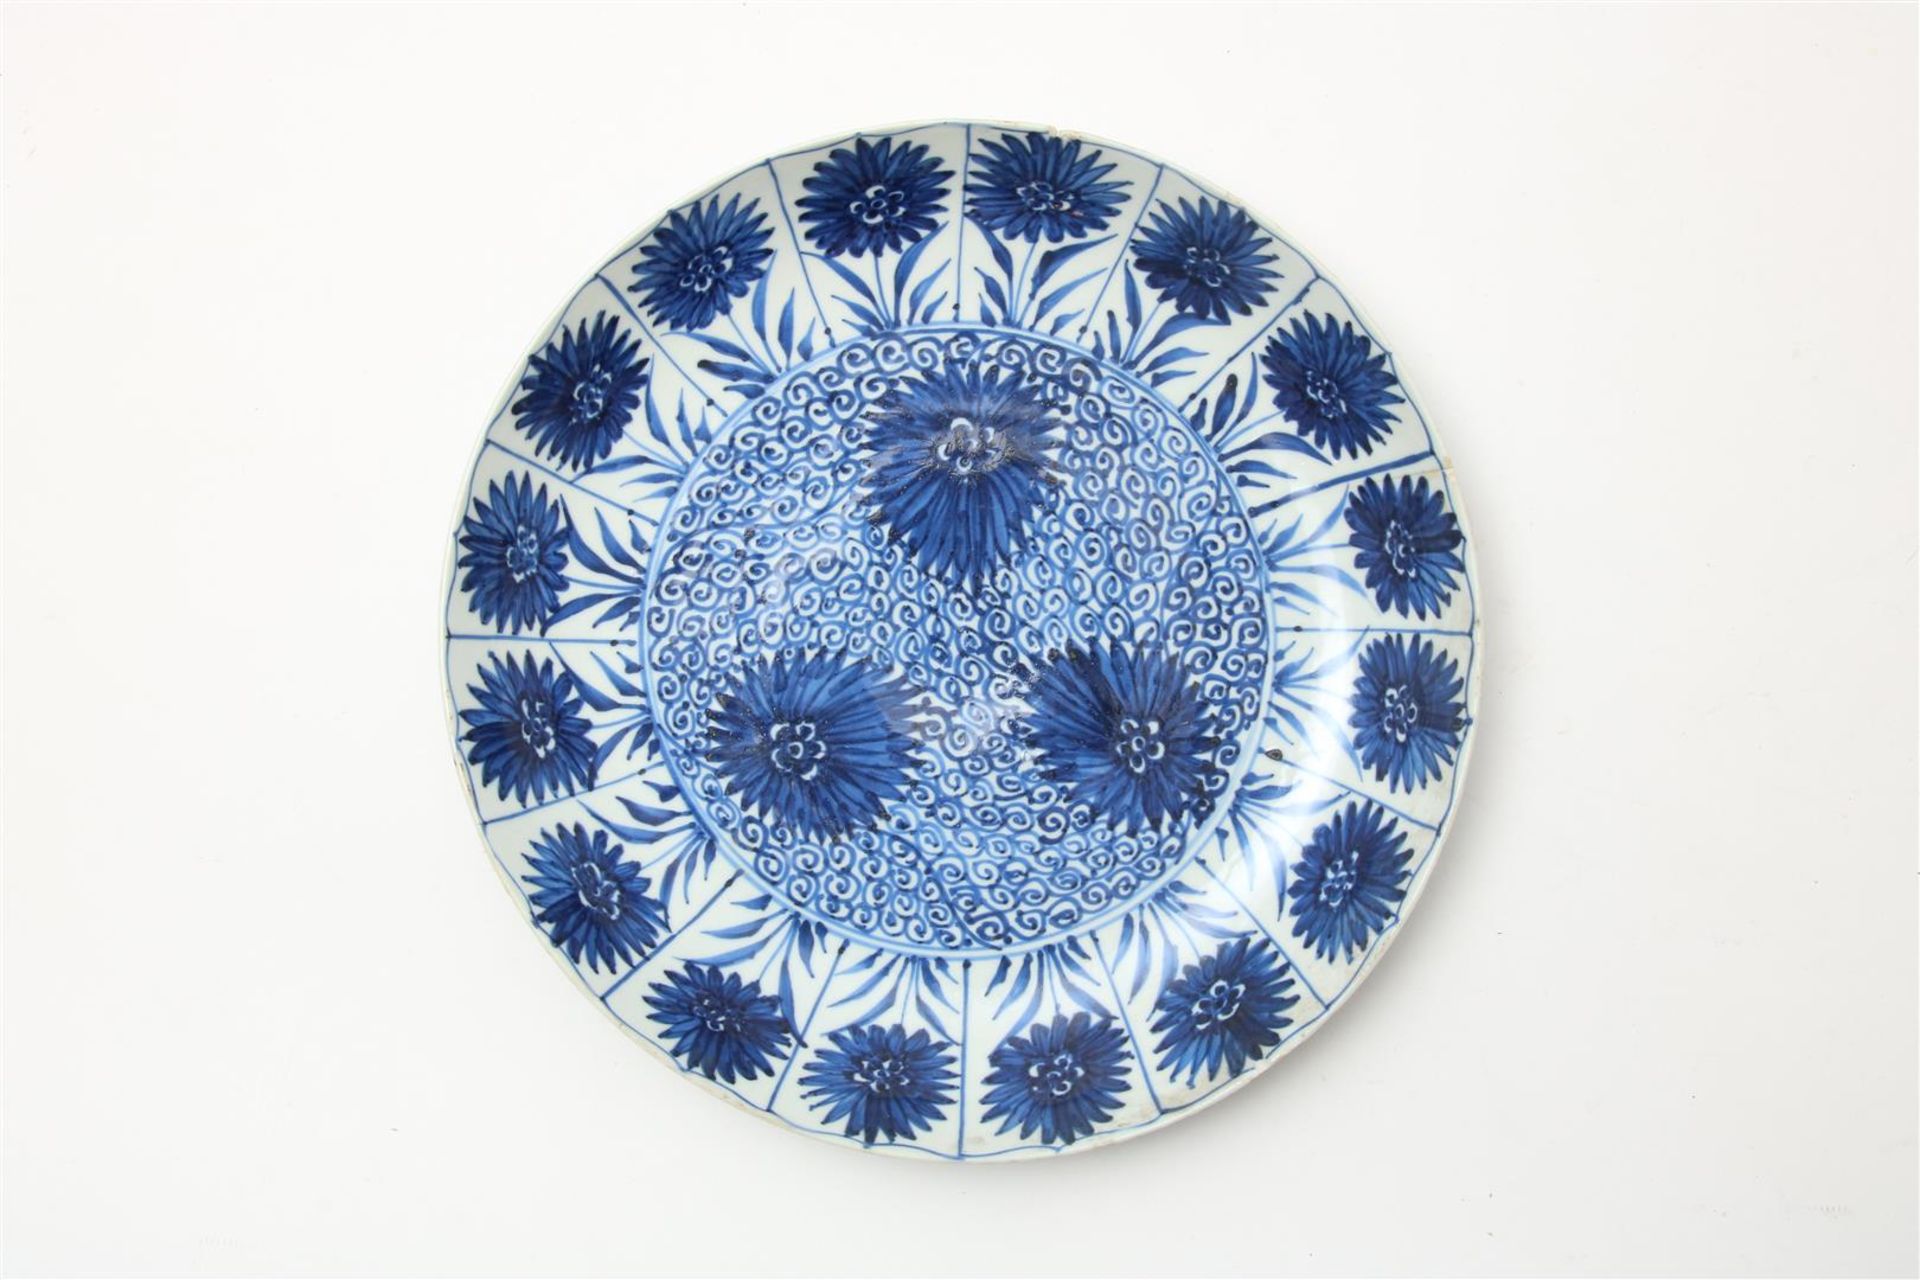 Porcelain Kangxi dish with Aster pattern decor, mark with Artemisia leaf, China 18th century,